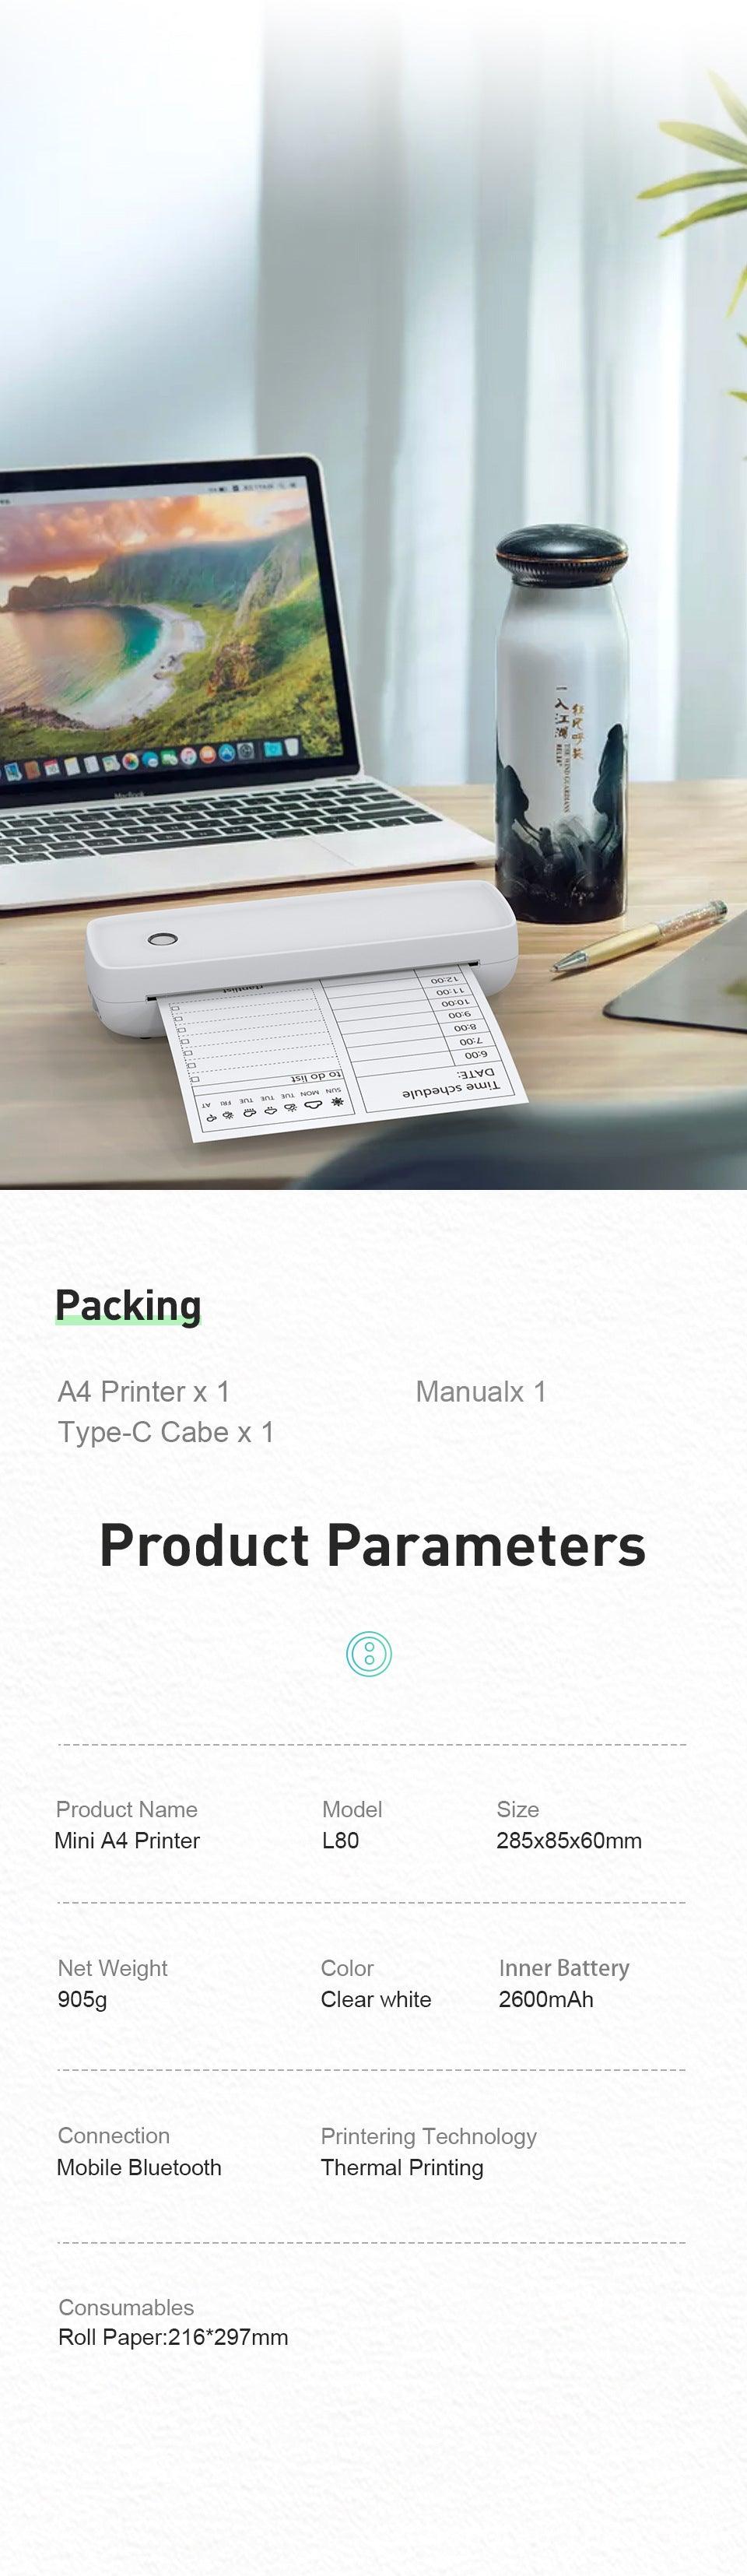 Portable Printer Wireless Bluetooth - Inkless Thermal Printer Supporting A4 Paper